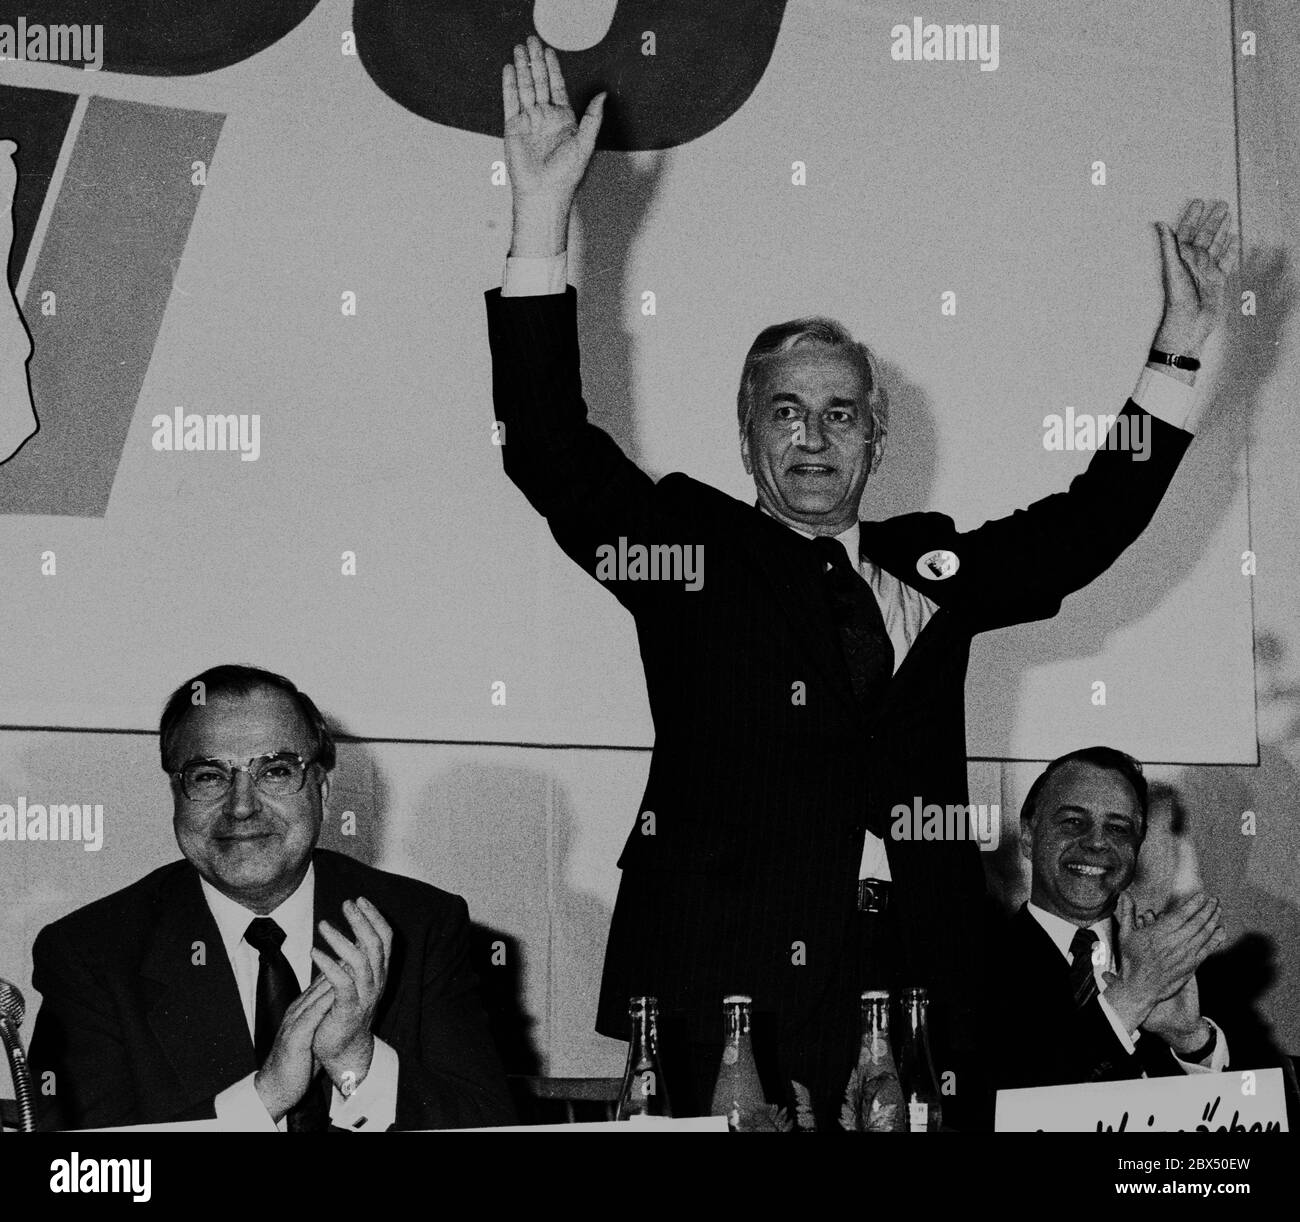 Berlin / Parties / CDU / 15.3.1979 Richard von Weizsaecker is to become top candidate for the Berlin CDU. Election campaign actions in Berlin, New World. Left Helmut Kohl, right Ernst Albrecht [automated translation] Stock Photo